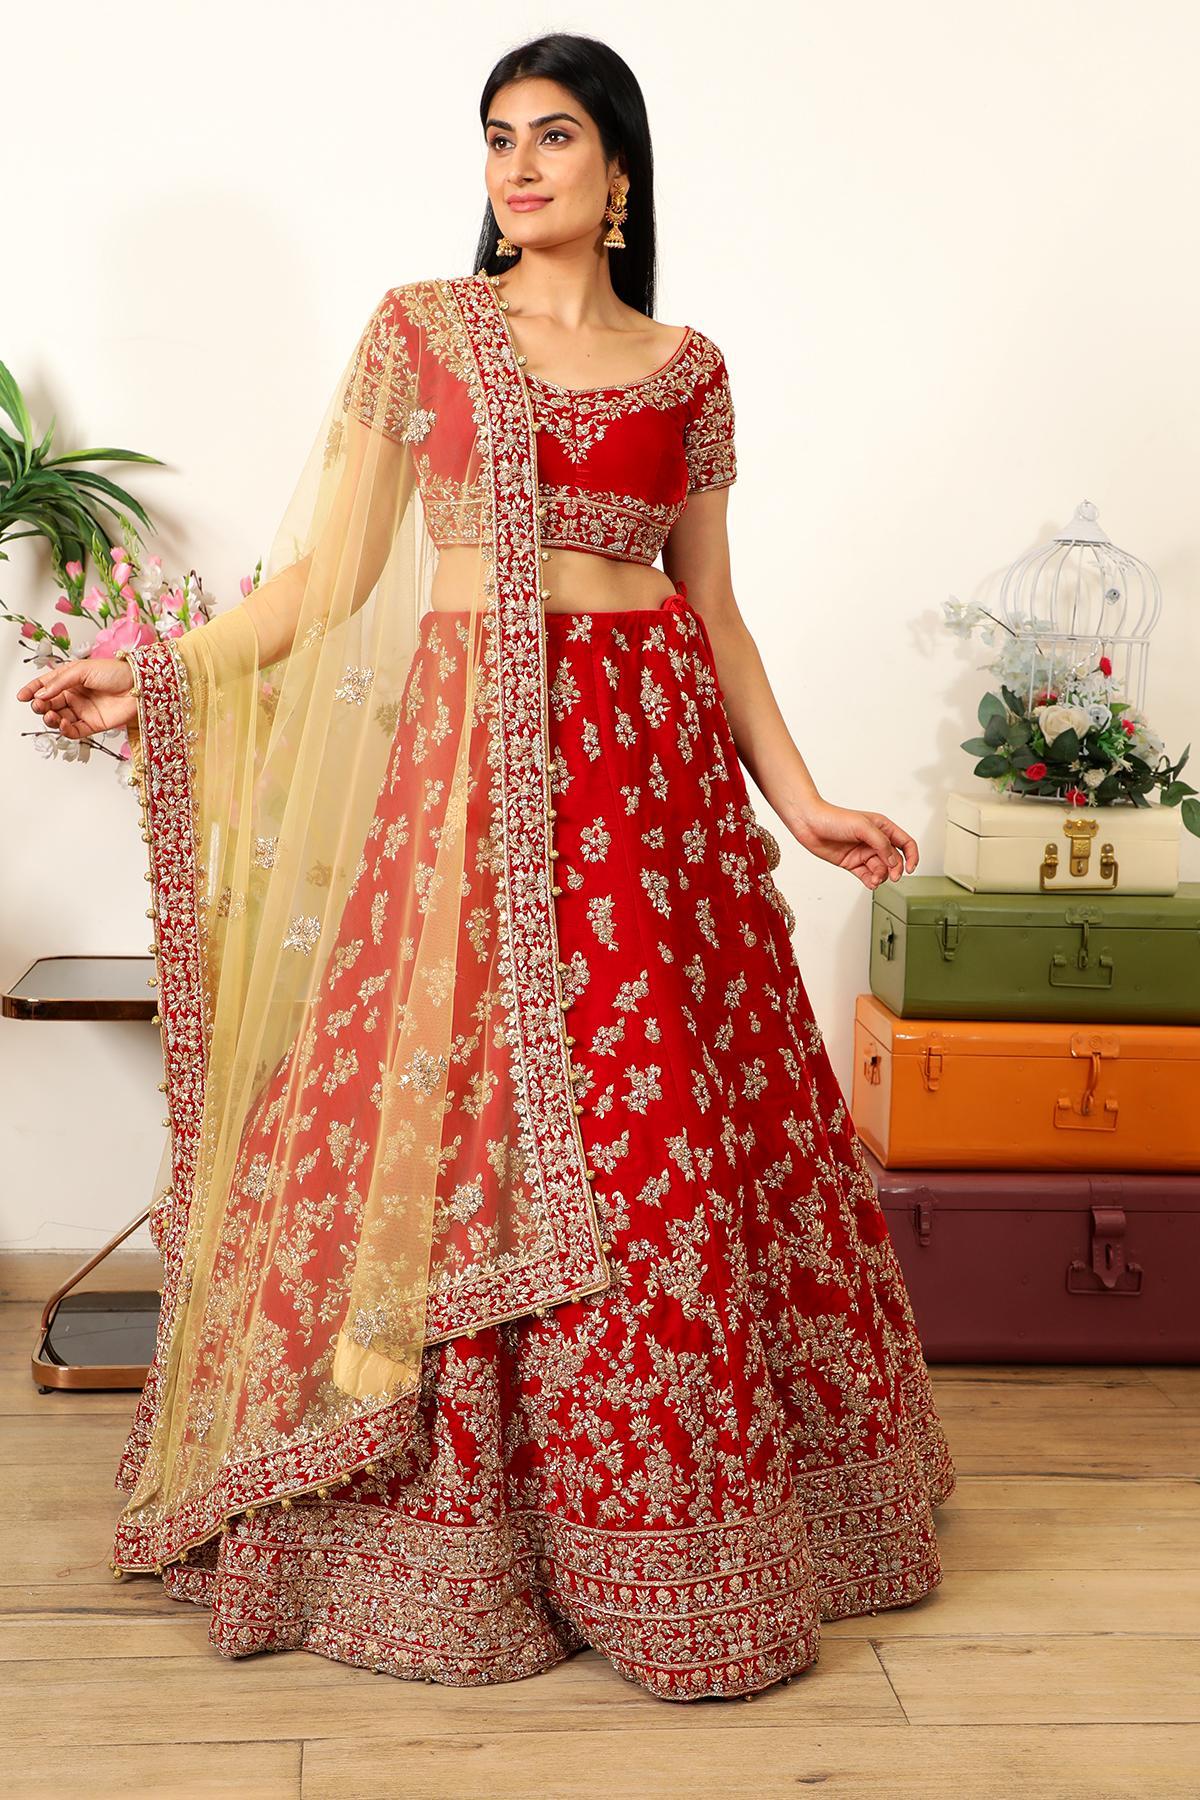 Search results for: 'golden colour lehenga'